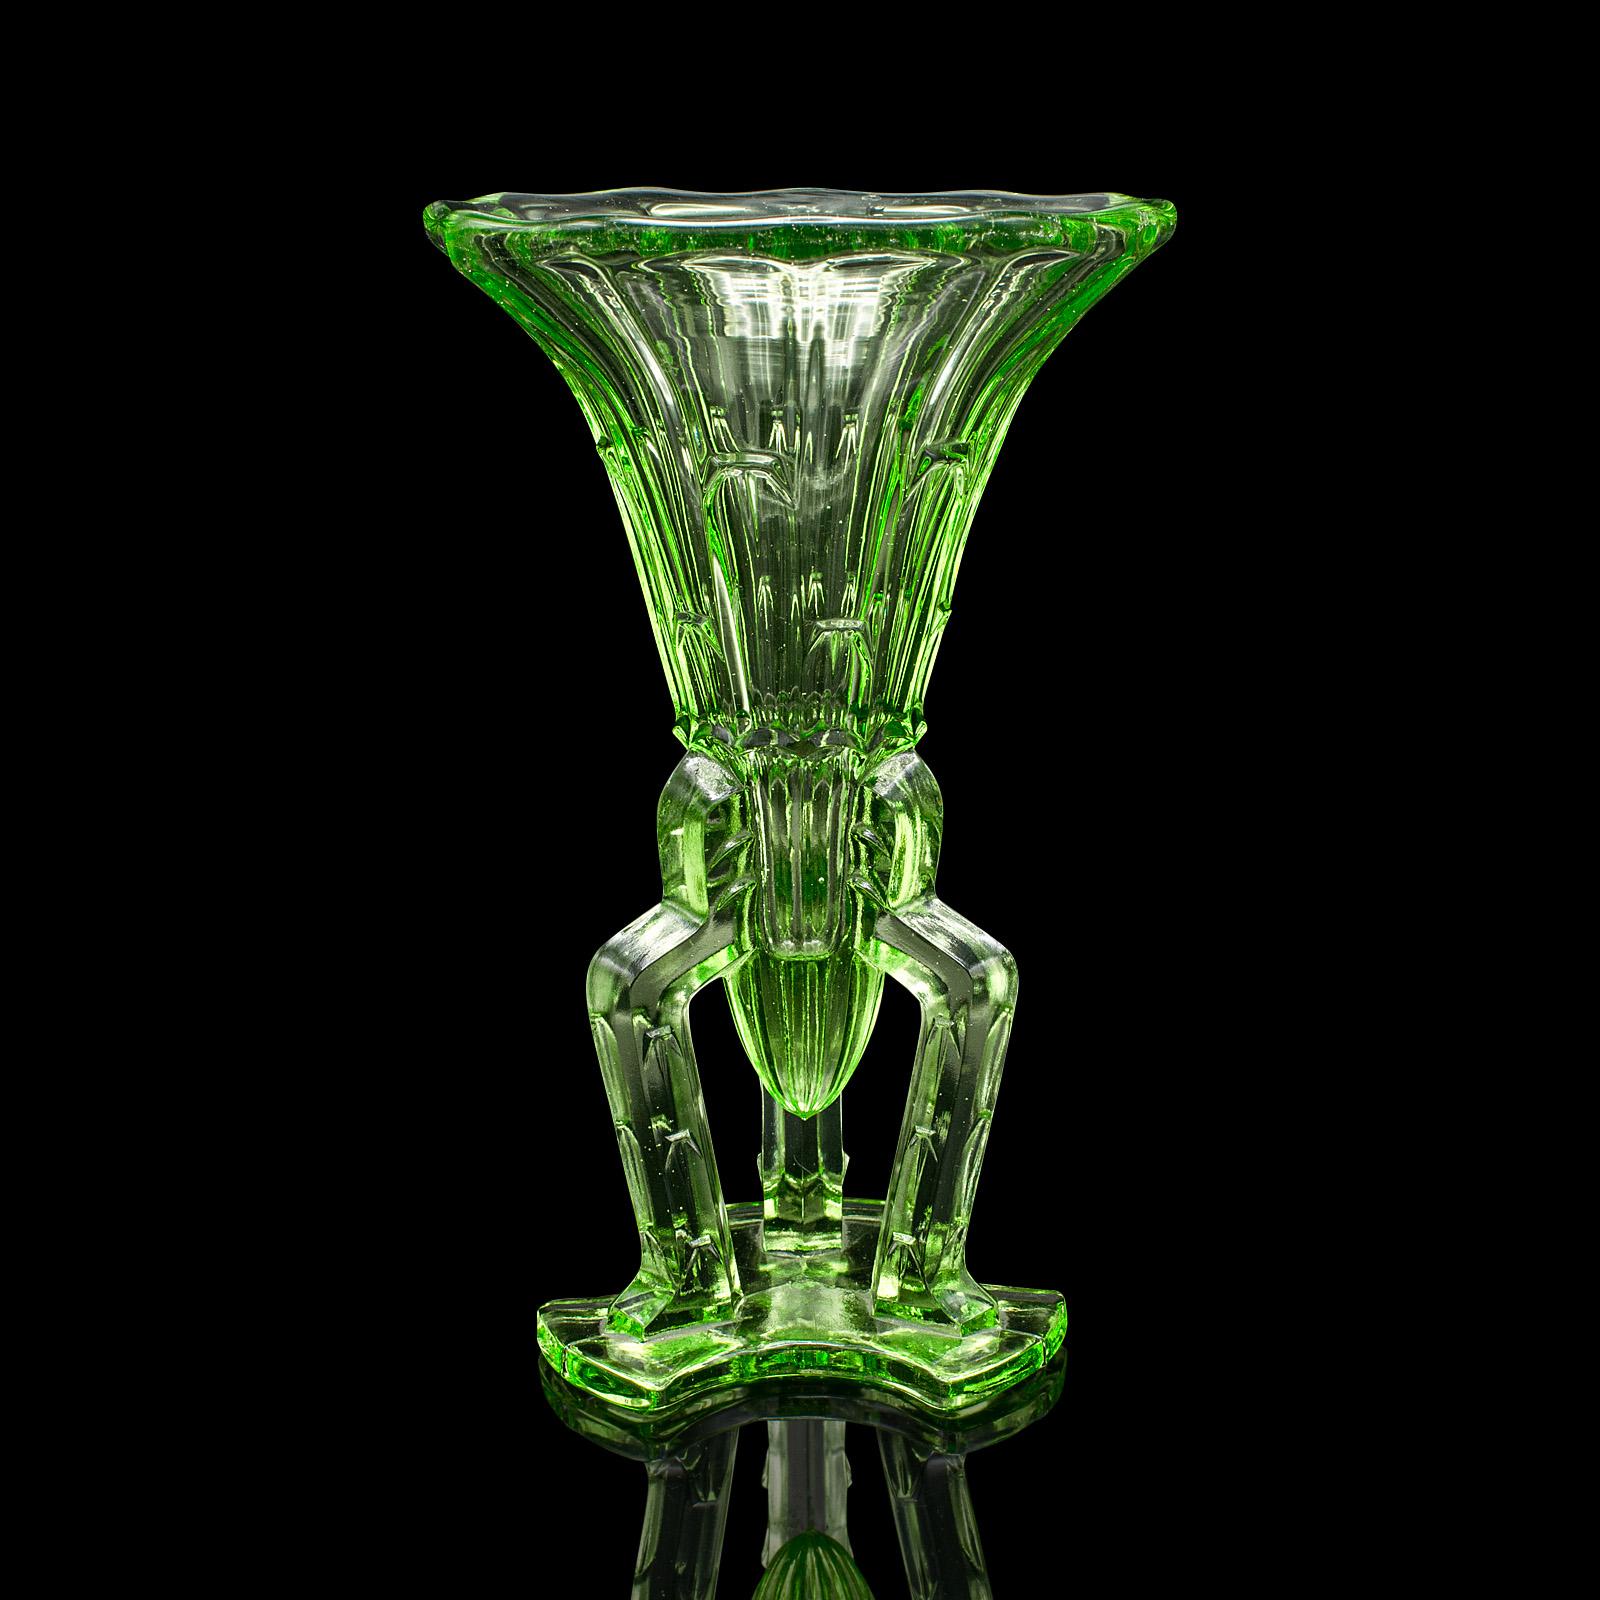 
This is a vintage rocket vase. An English, art glass posy vase, dating to the Art Deco period, circa 1930.

Appealingly decorative rocket vase with great colour
Displays a desirable aged patina and in good order
Green glass presents a vibrant